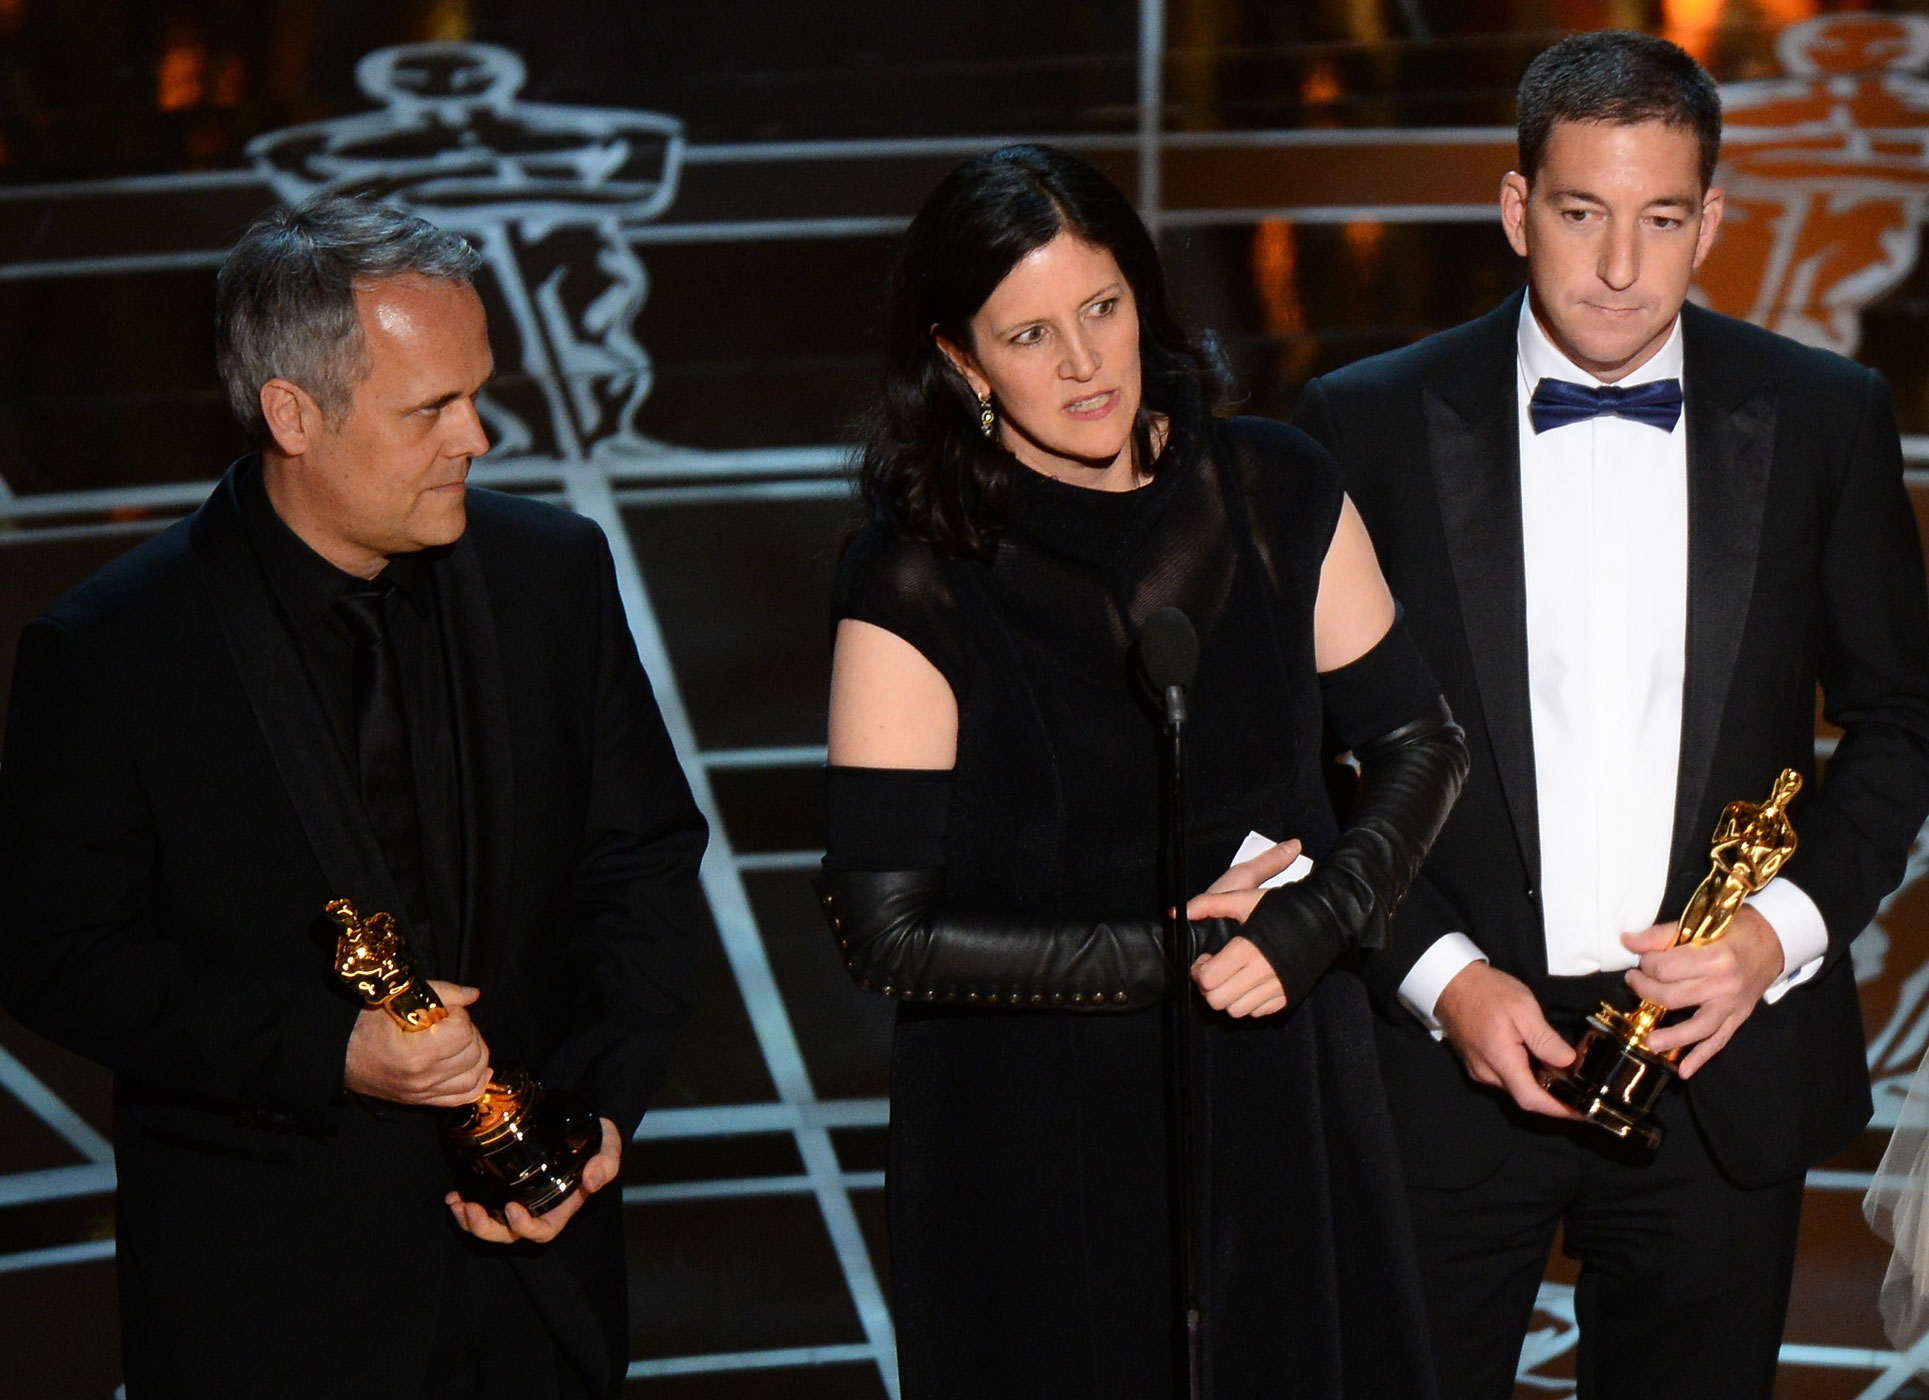 Winners for Best Documentary Feature <i>CitizenFour</i> Laura Poitras, center, and Dirk Wilutzky, left, give their acceptance speech flanked by Glenn Greenwald  at the 87th Oscars Feb. 22, 2015 in Hollywood, Calif. (Robyn Beck—AFP/Getty Images)